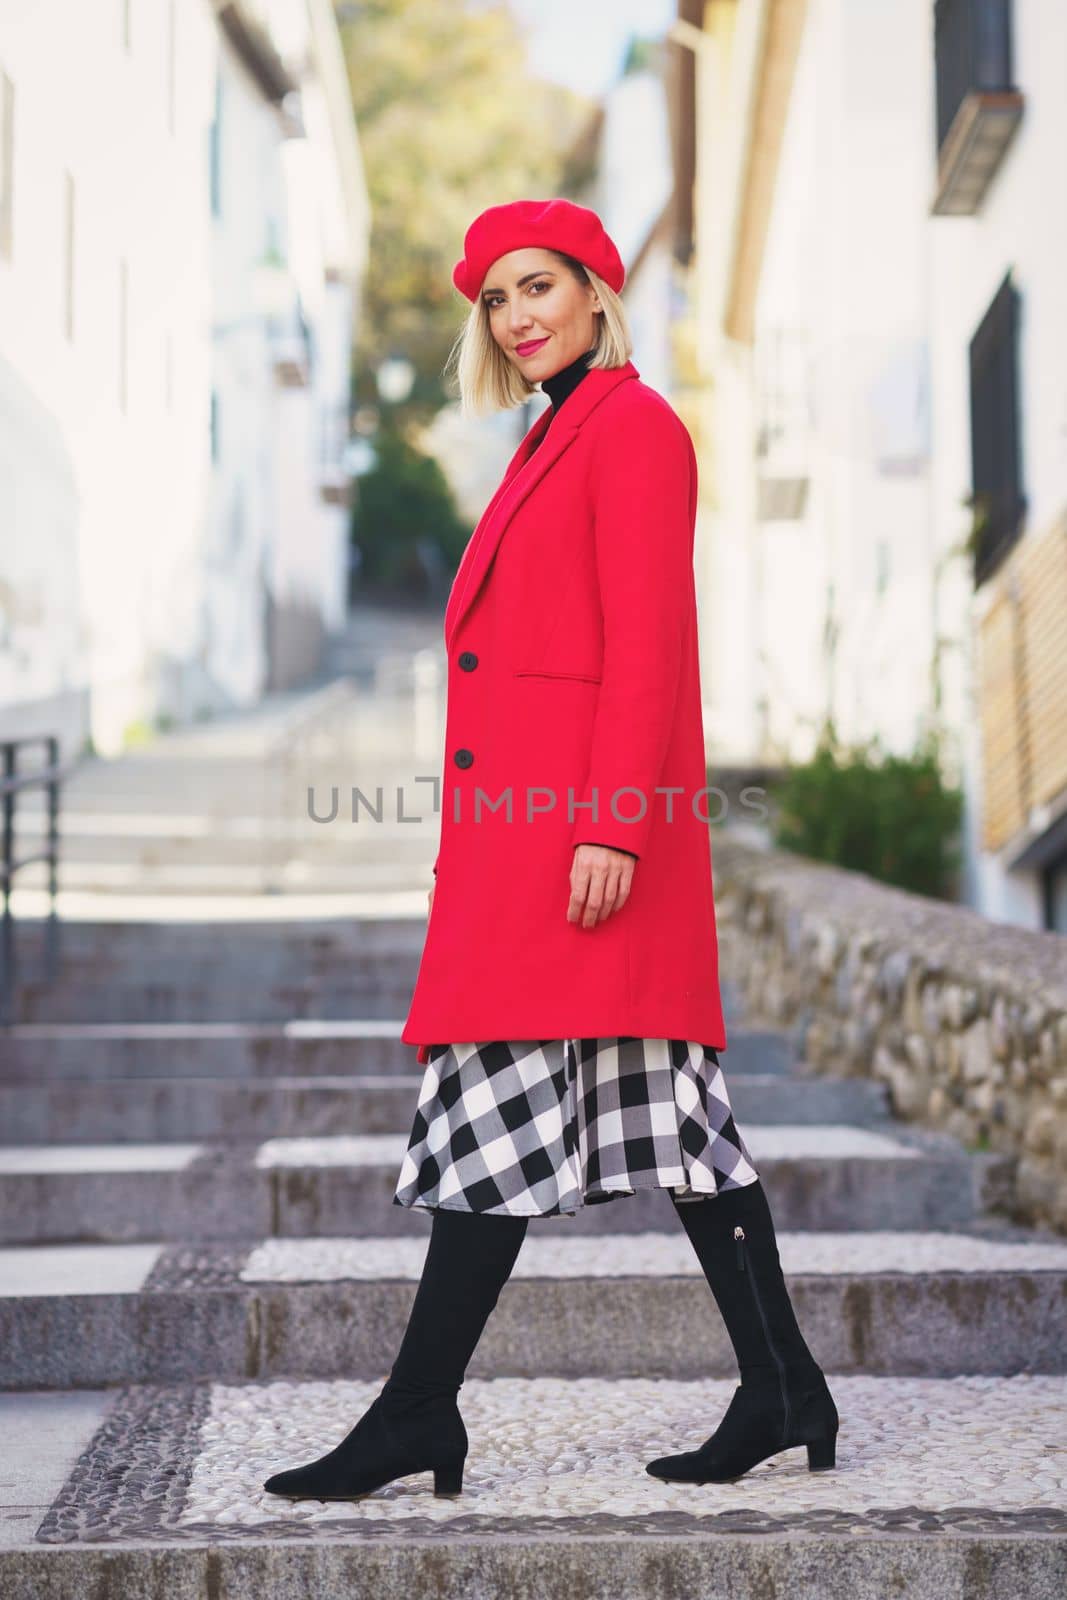 Stylish woman on stairs in city by javiindy